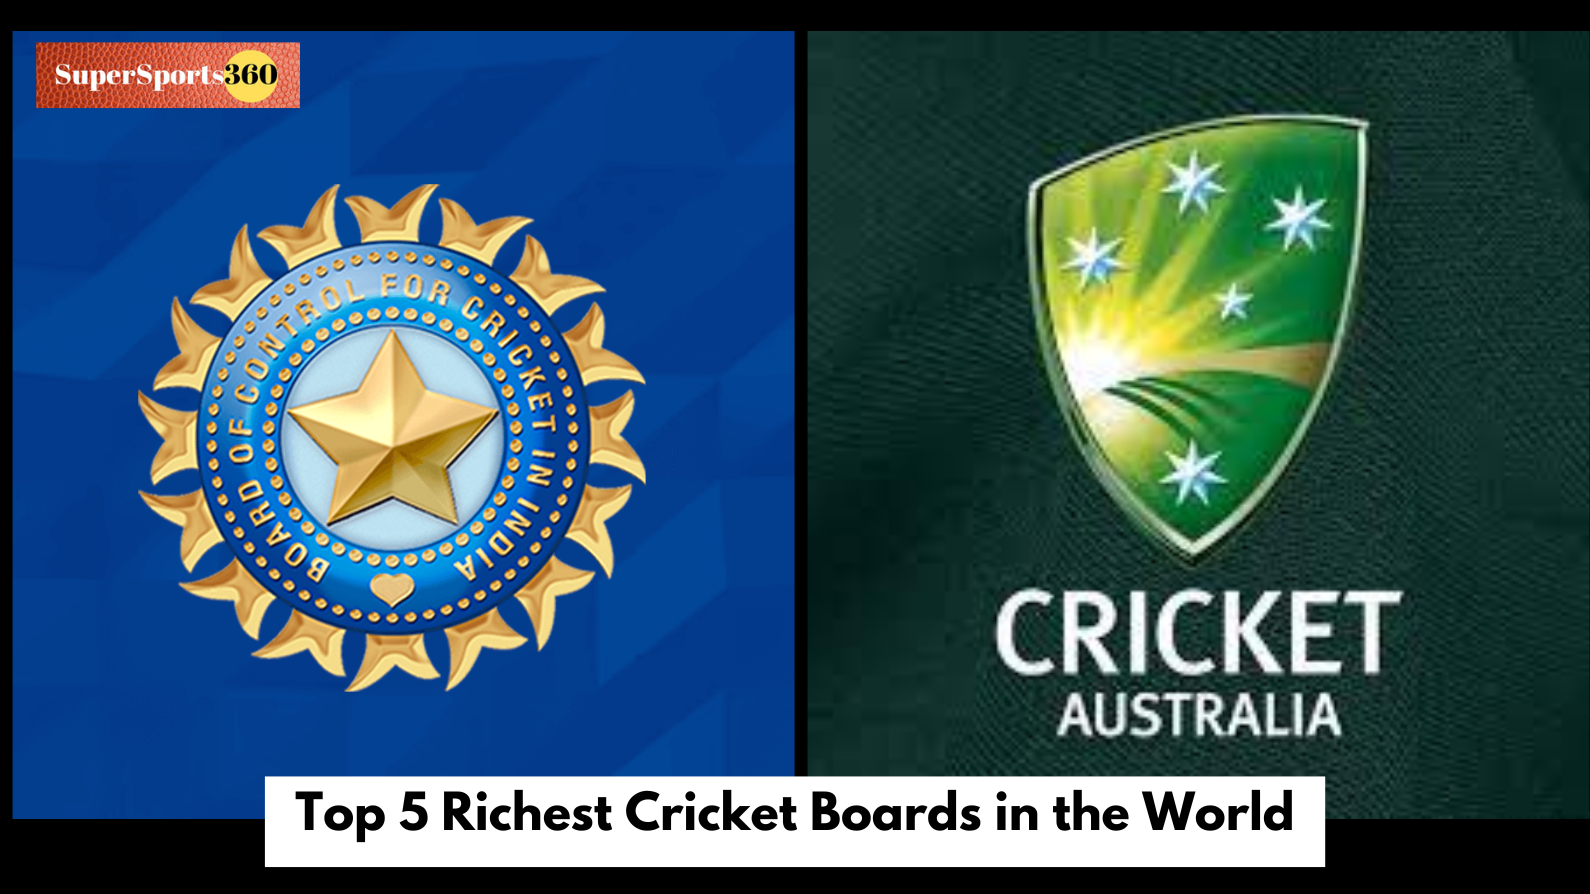 Top 5 Richest Cricket Boards in the World